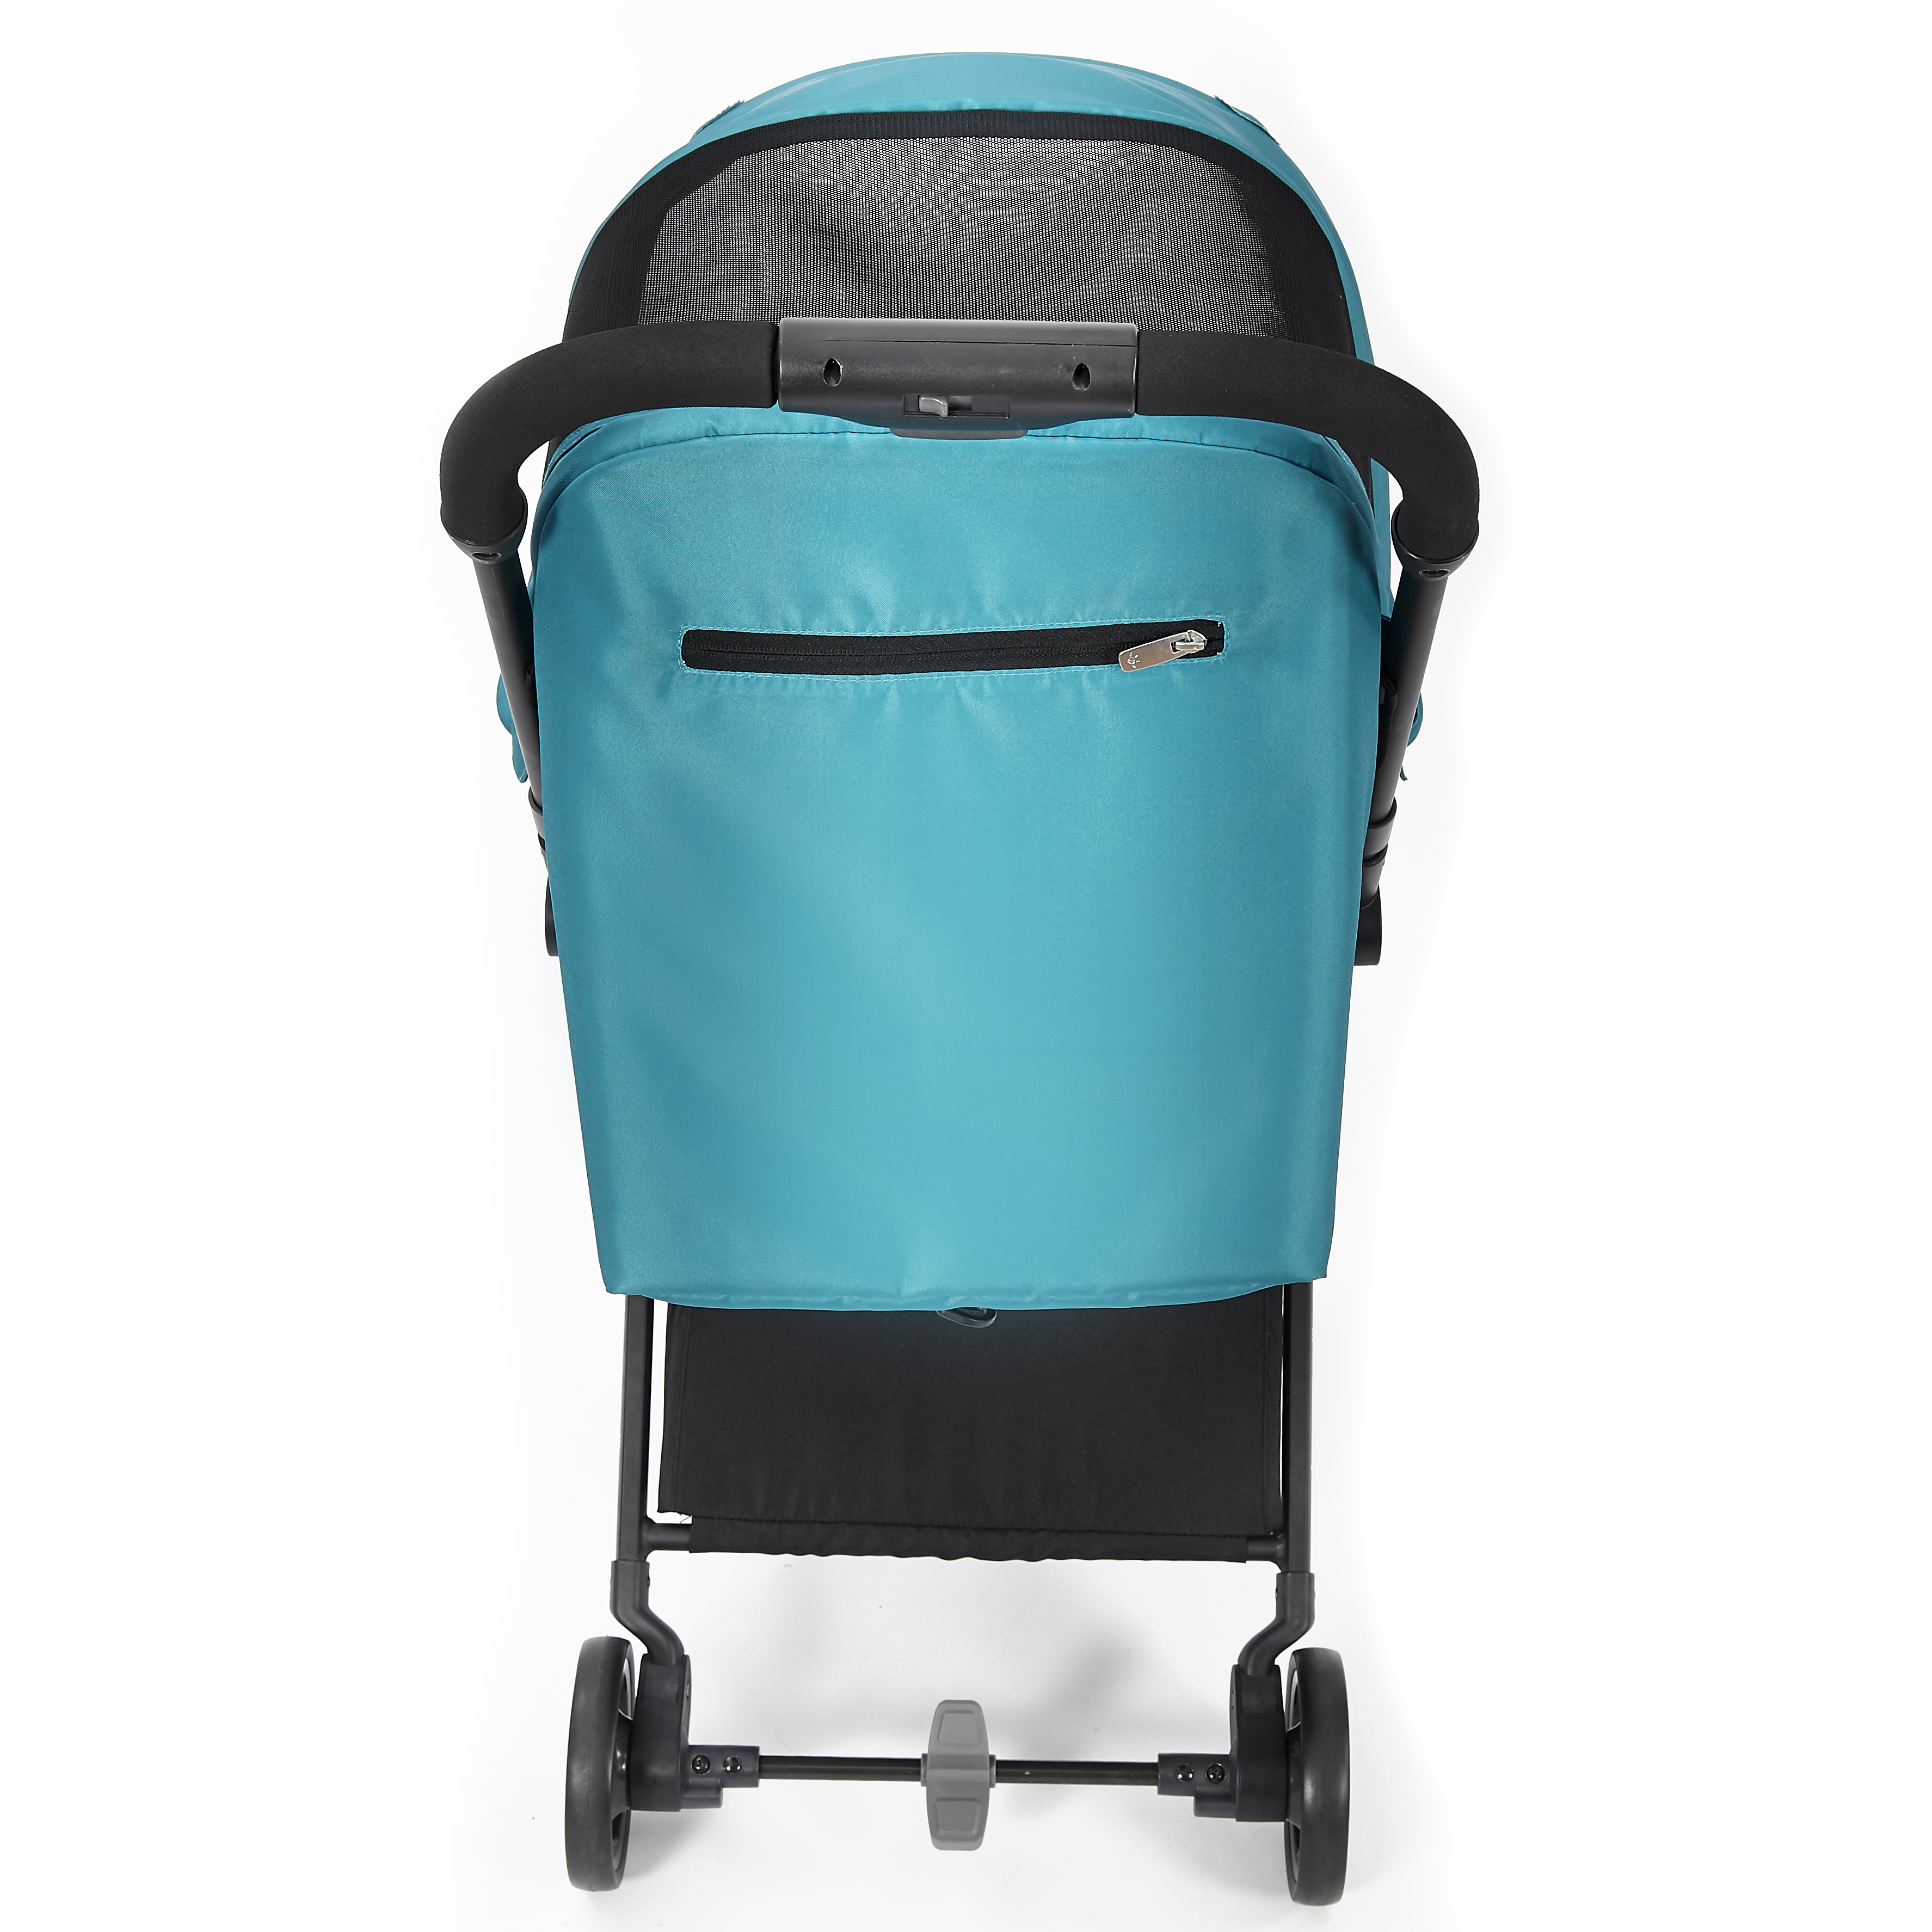 Diono Traverze Plus Lightweight Compact Stroller with Easy Fold, Teal - image 4 of 9